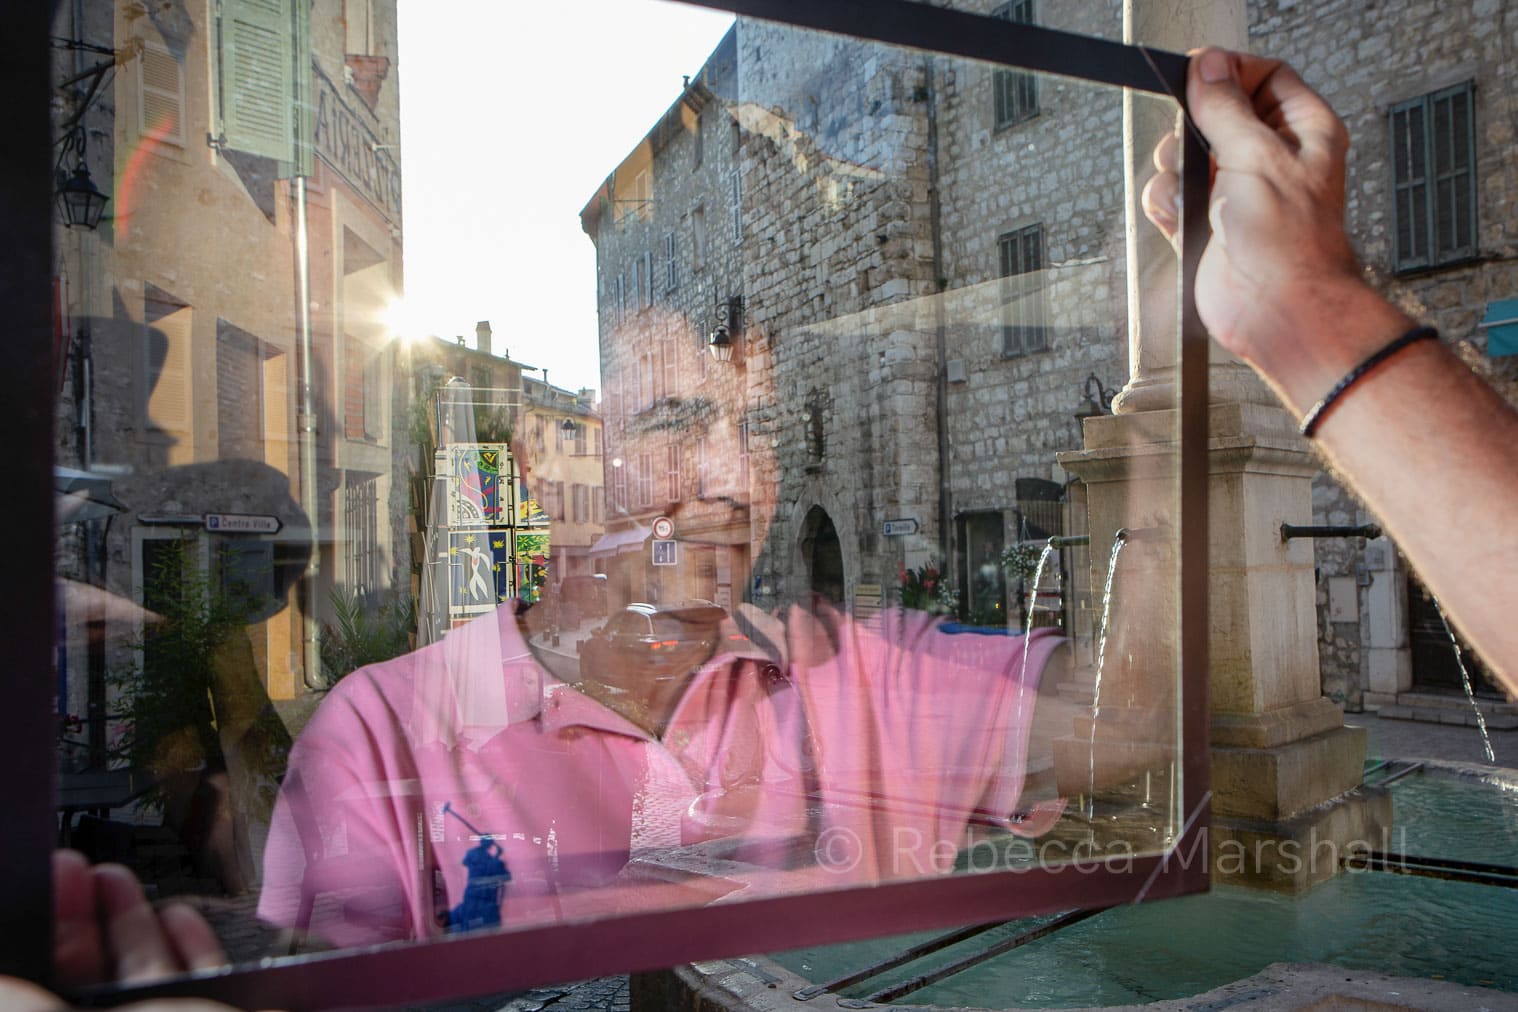 Photograph of the reflection of a man in a sheet of glass that he holds beside a fountain in a town square